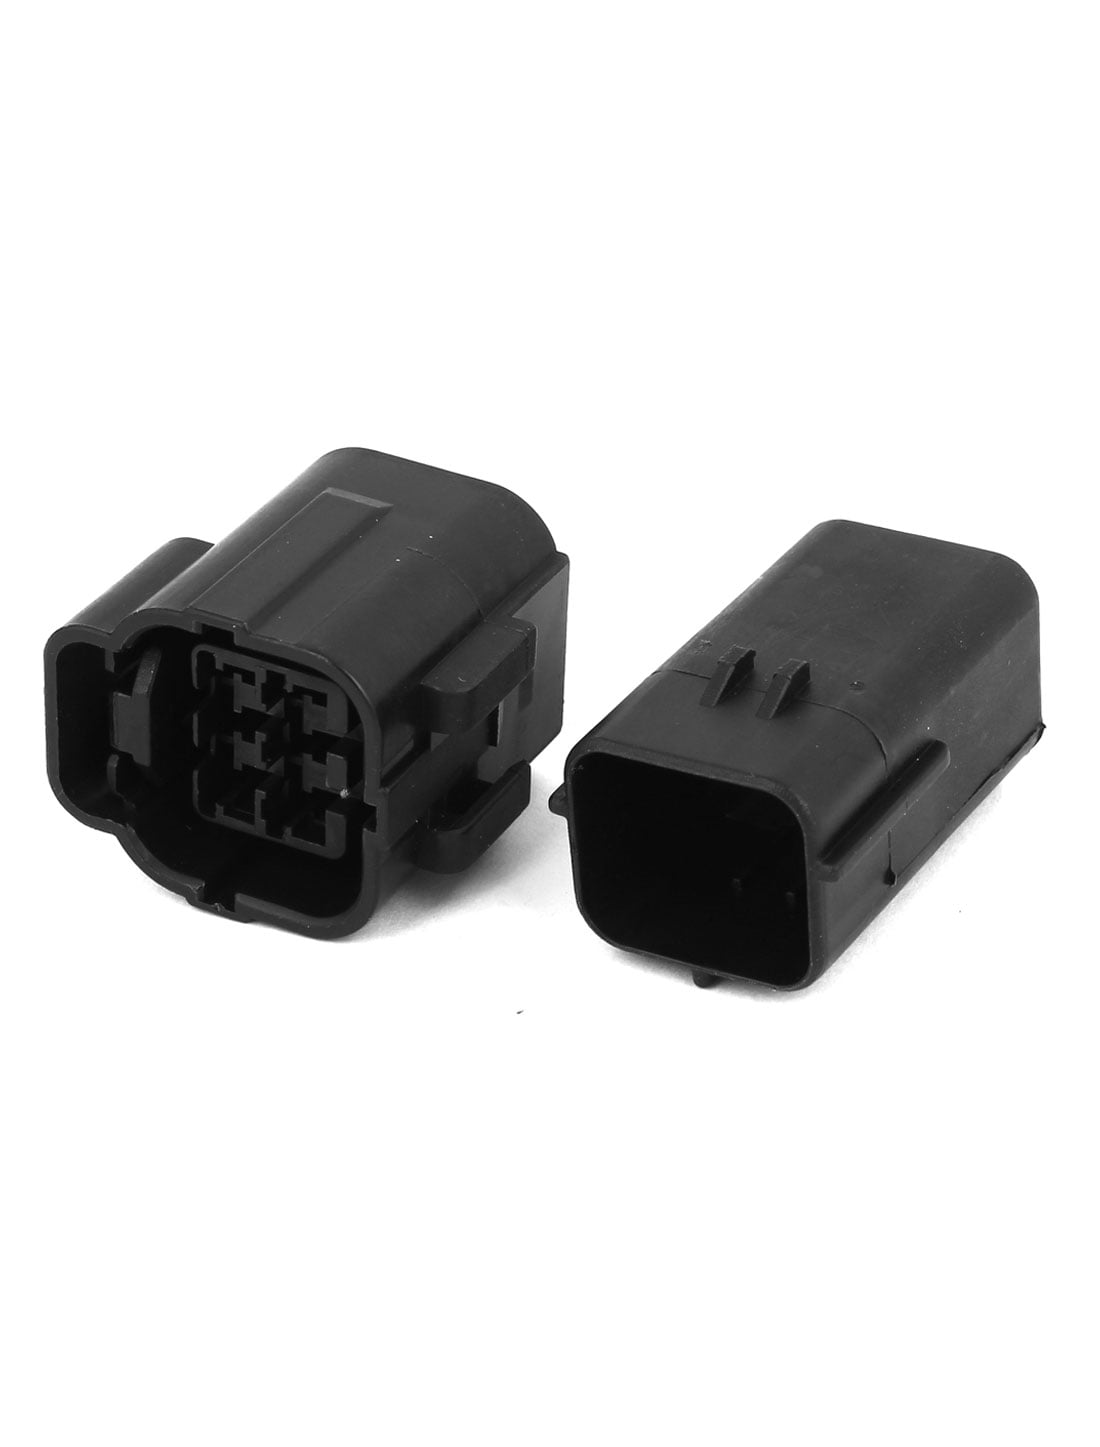 Car Male & Female Waterproof Electrical Connectors Plug Socket Kit With 10cm Wire AWG Gauge Marine 2 + 3 + 4 Pin HIFROM 10 Kit 